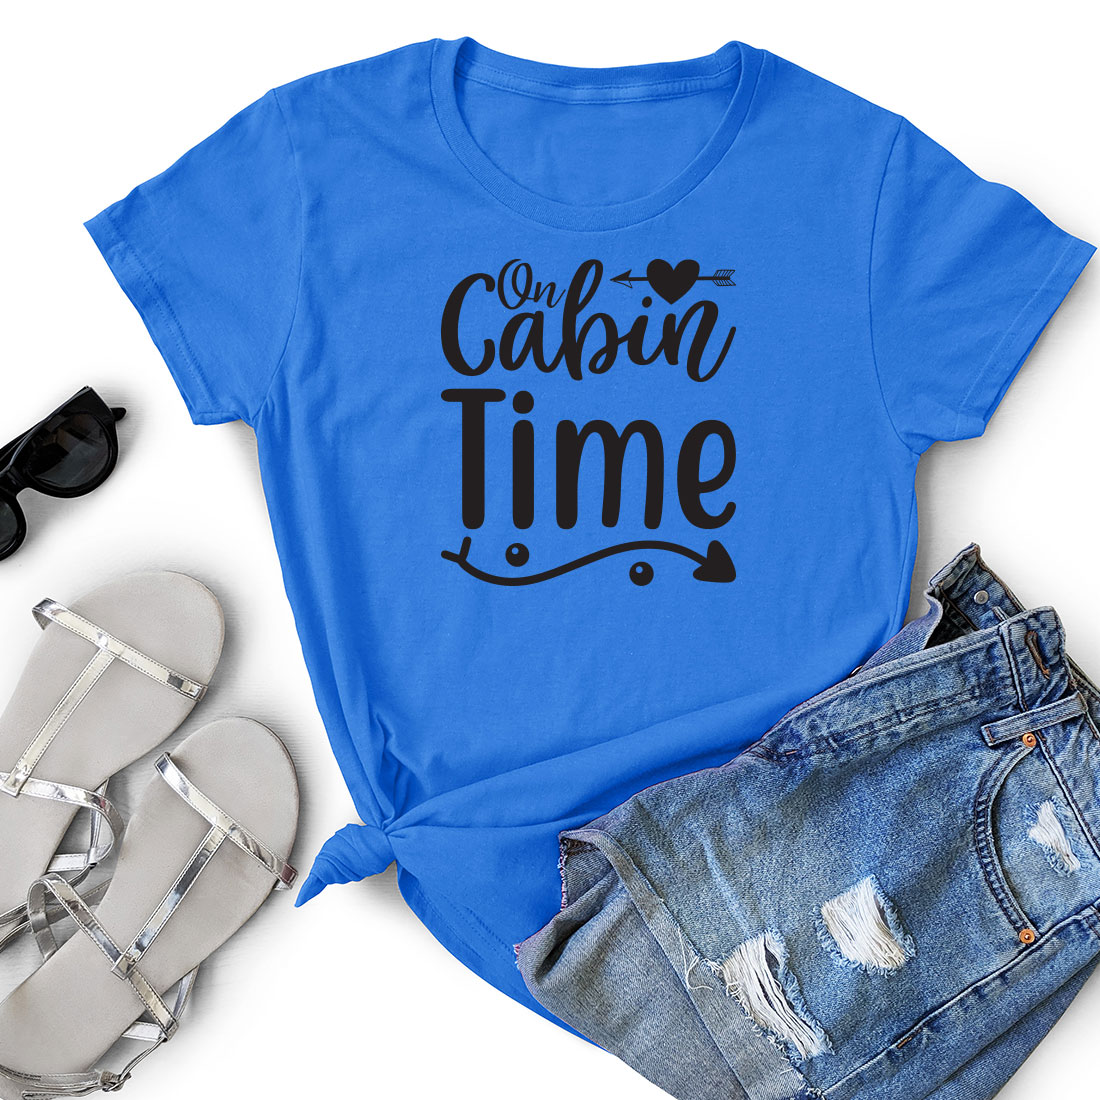 T - shirt that says cabin time next to a pair of shorts.